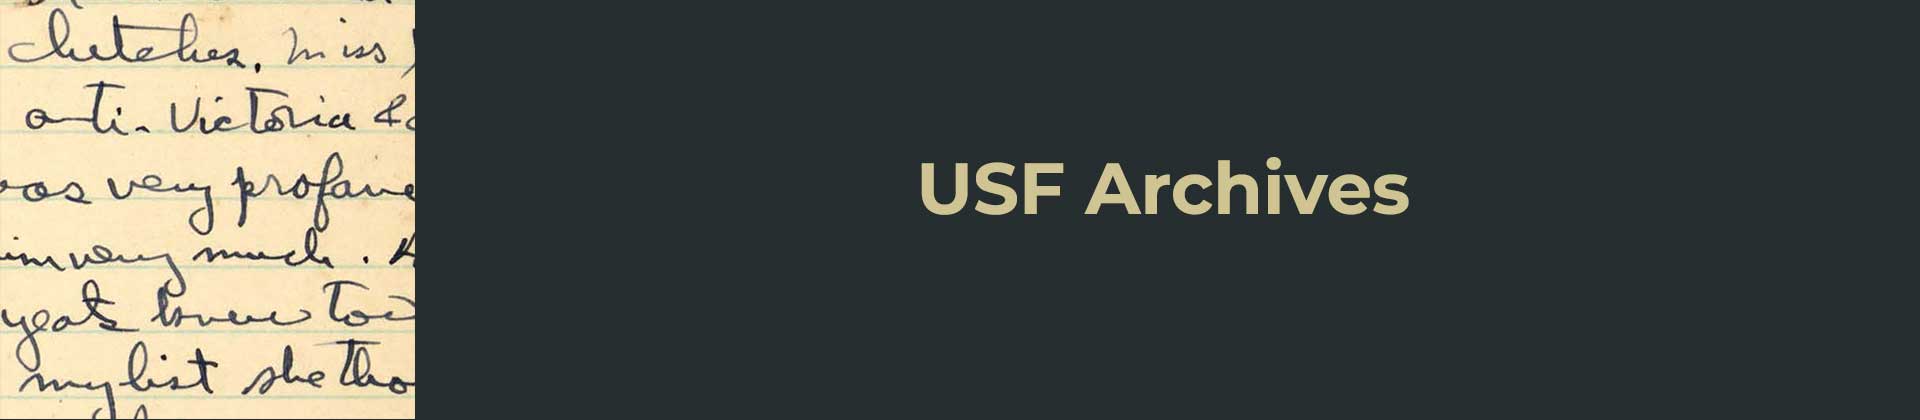 USF Archives and Documents